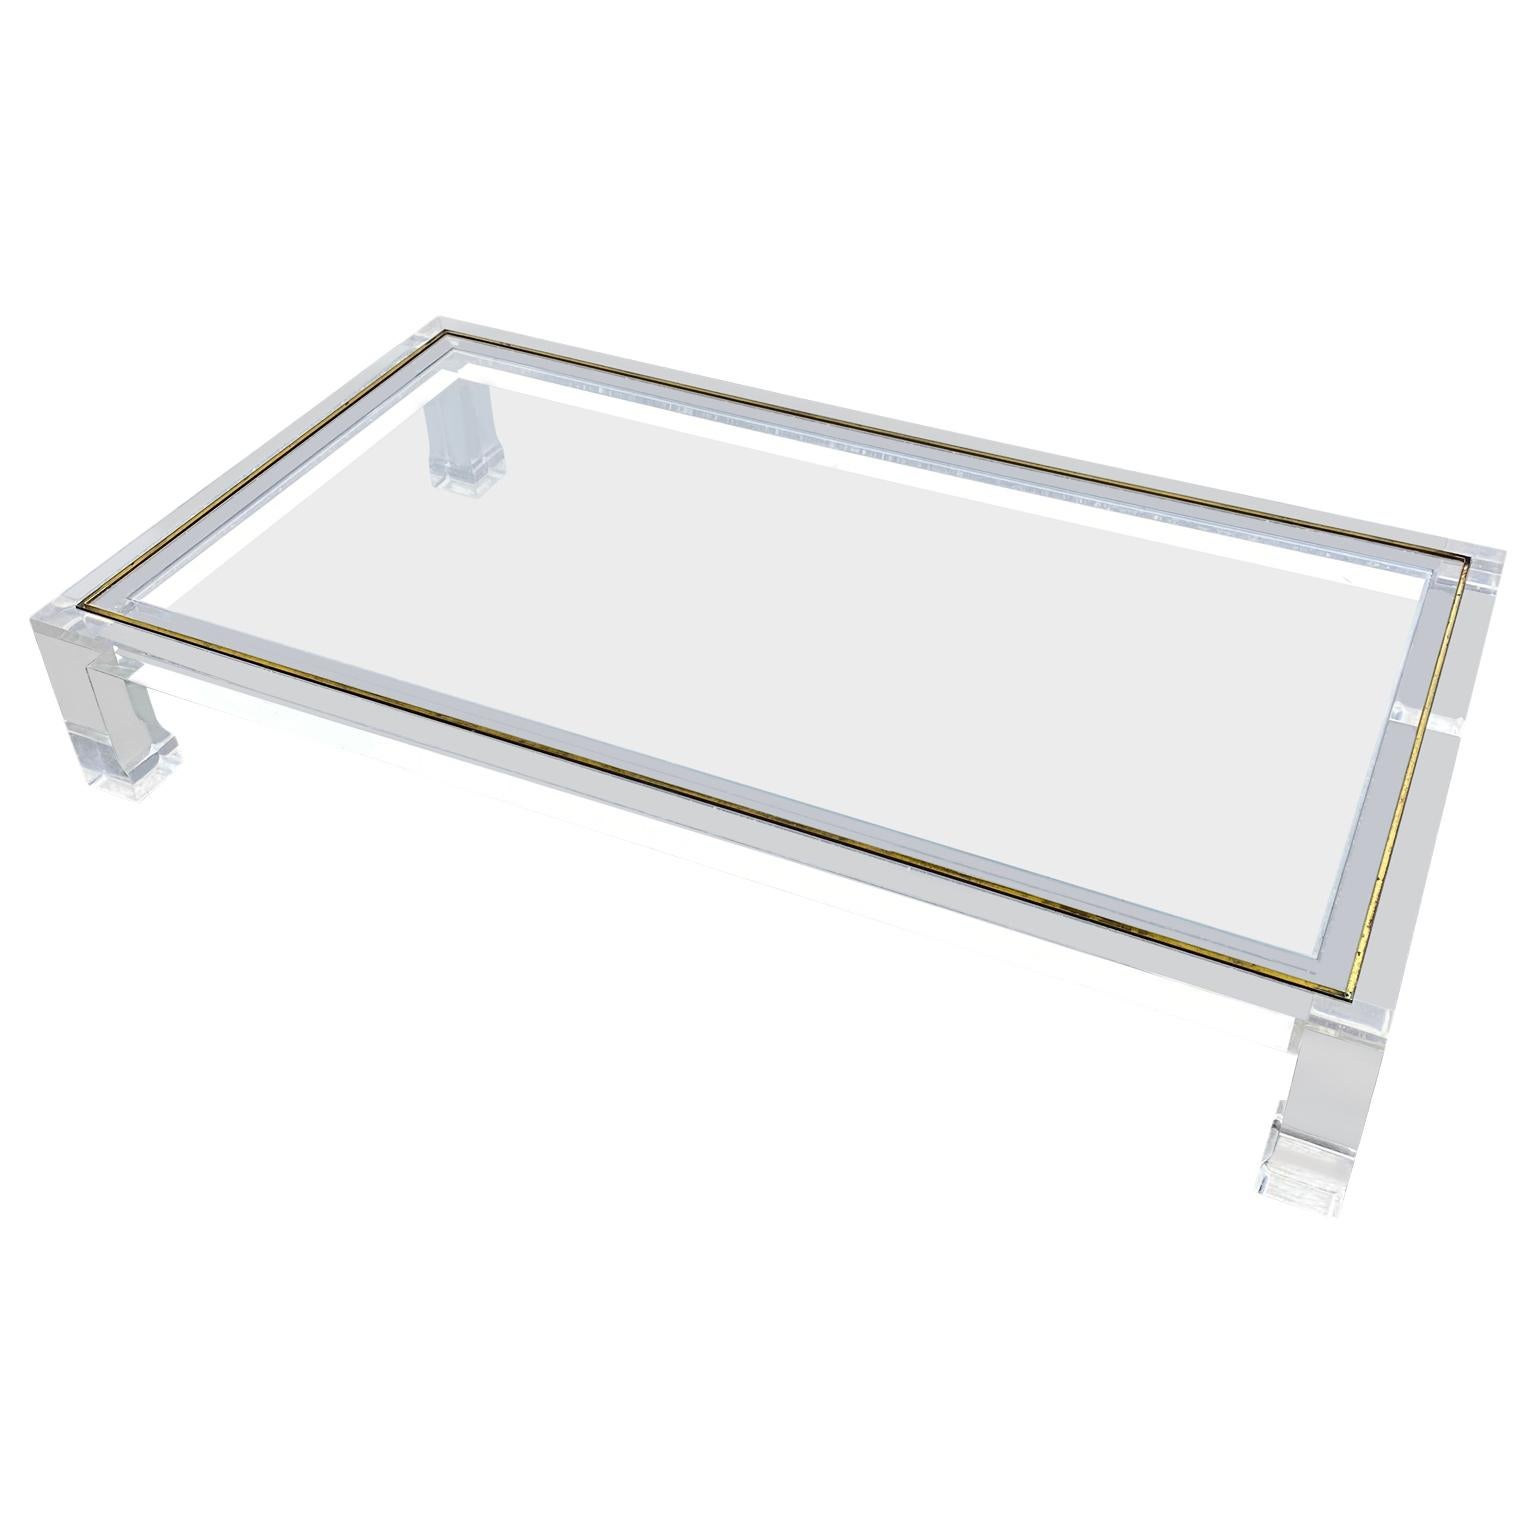 Large Italian Rectangular Lucite, Inlaid Brass Edge And Glass Cocktail Table For Sale 6